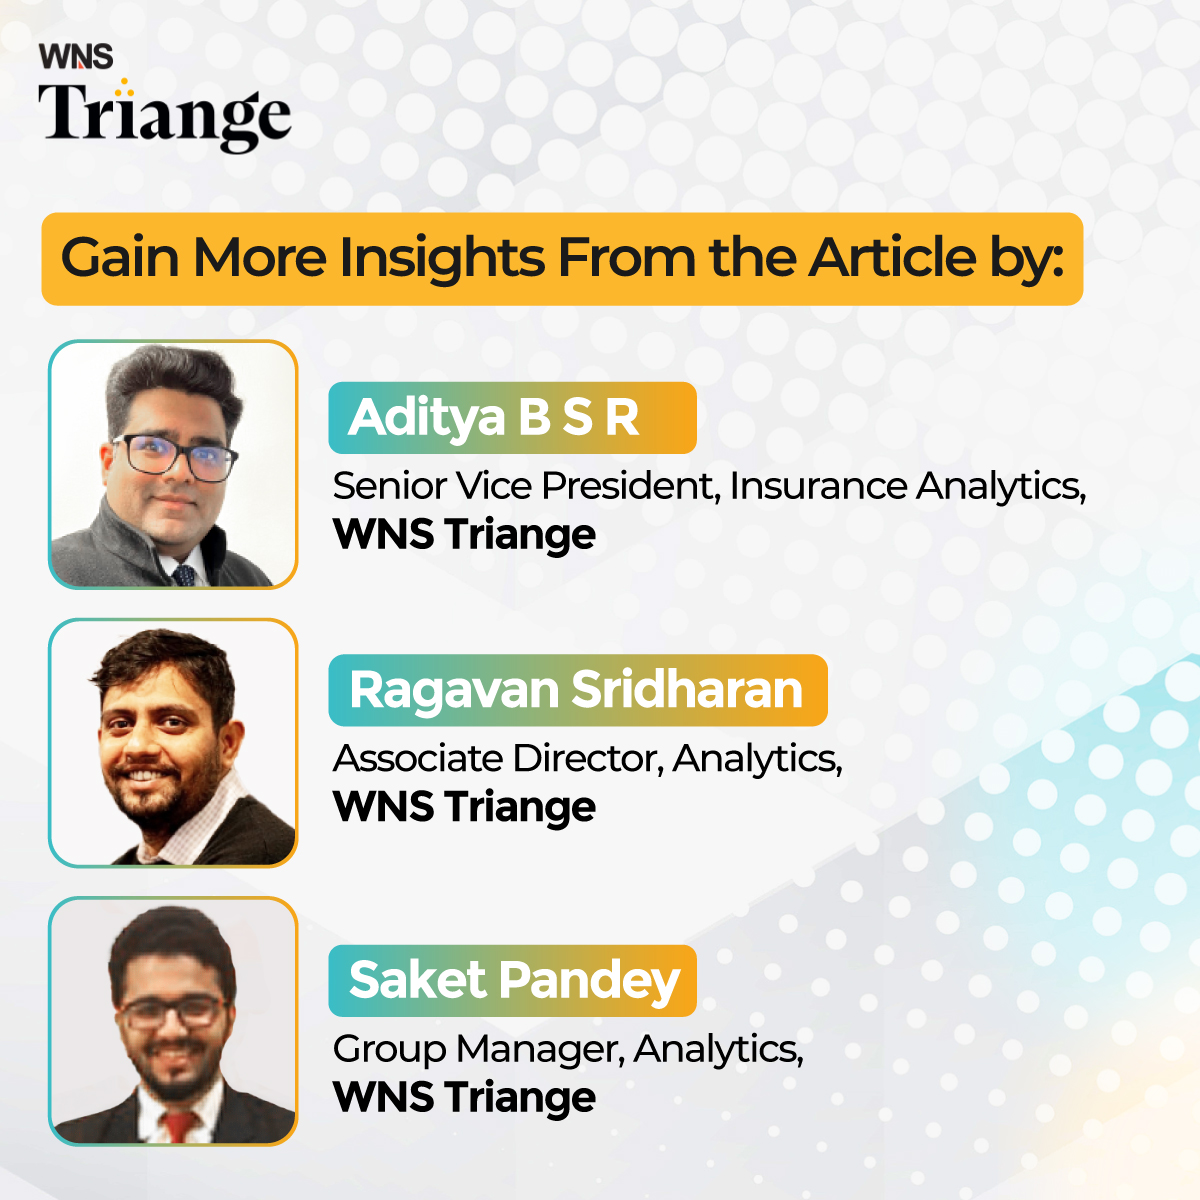 Regulatory submissions to the ELTO can be challenging. Read our article to see how WNS’ #RegTech app can streamline compliance through automated #data validation and error tracking: bit.ly/RT1-T #WNSTriange